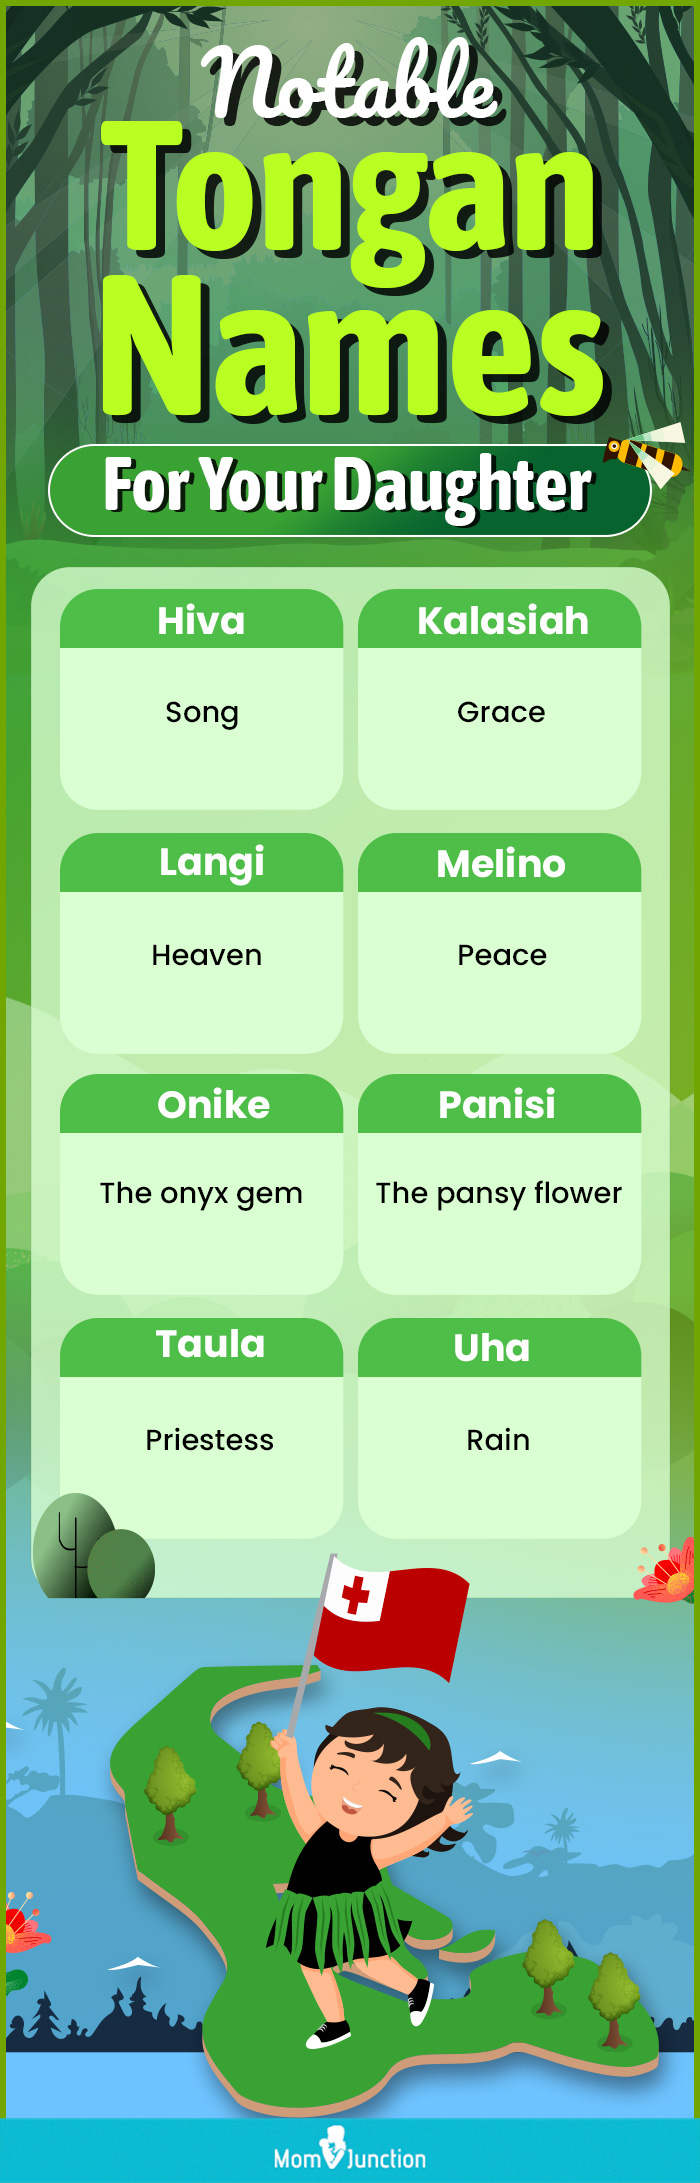 notable tongan names for your daughter (infographic)